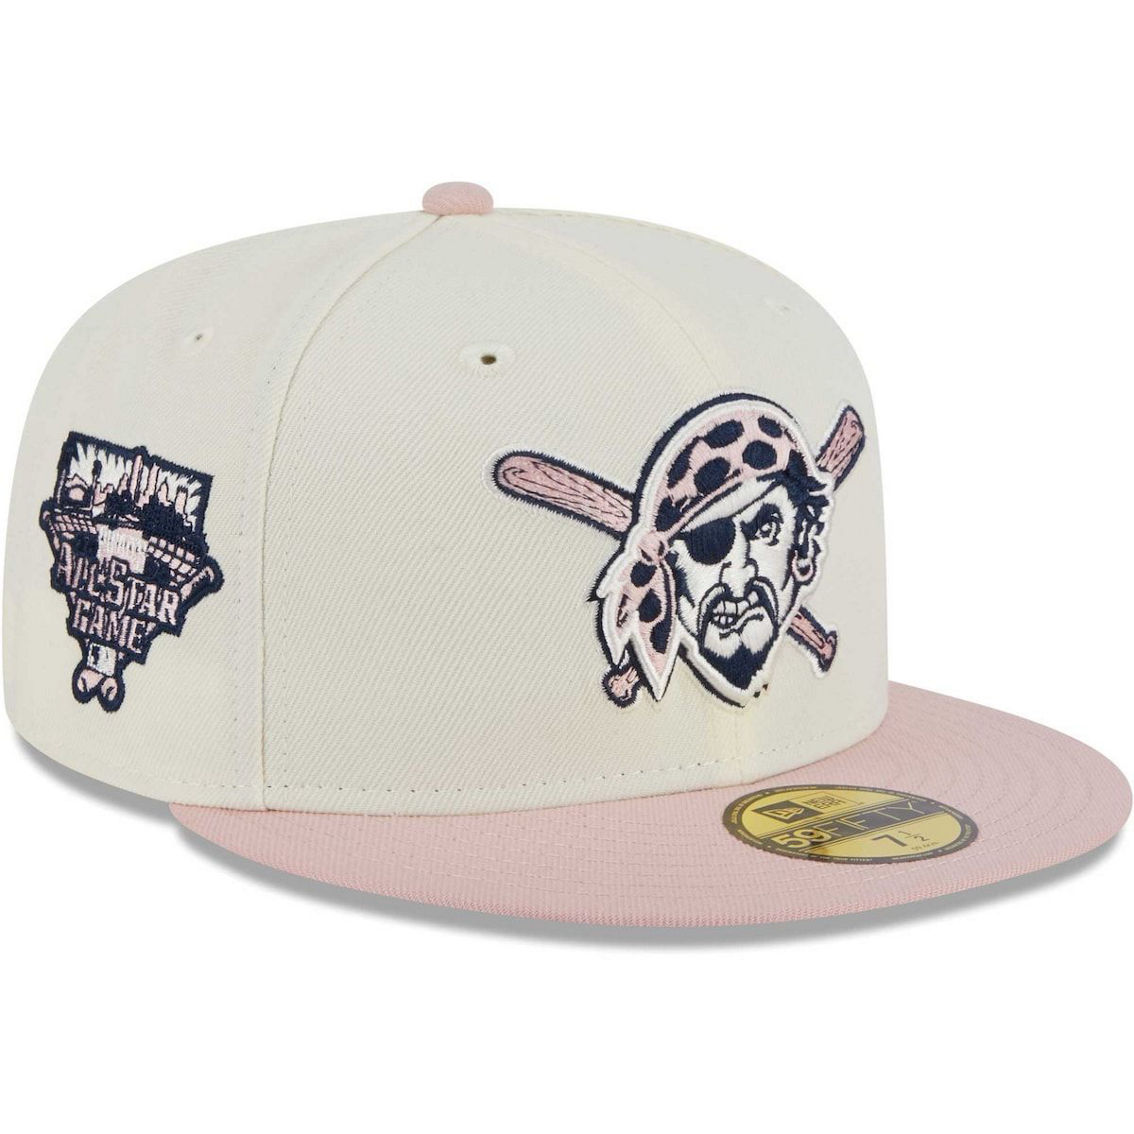 Atlanta Braves New Era Chrome Rogue 59FIFTY Fitted Hat - White/Pink